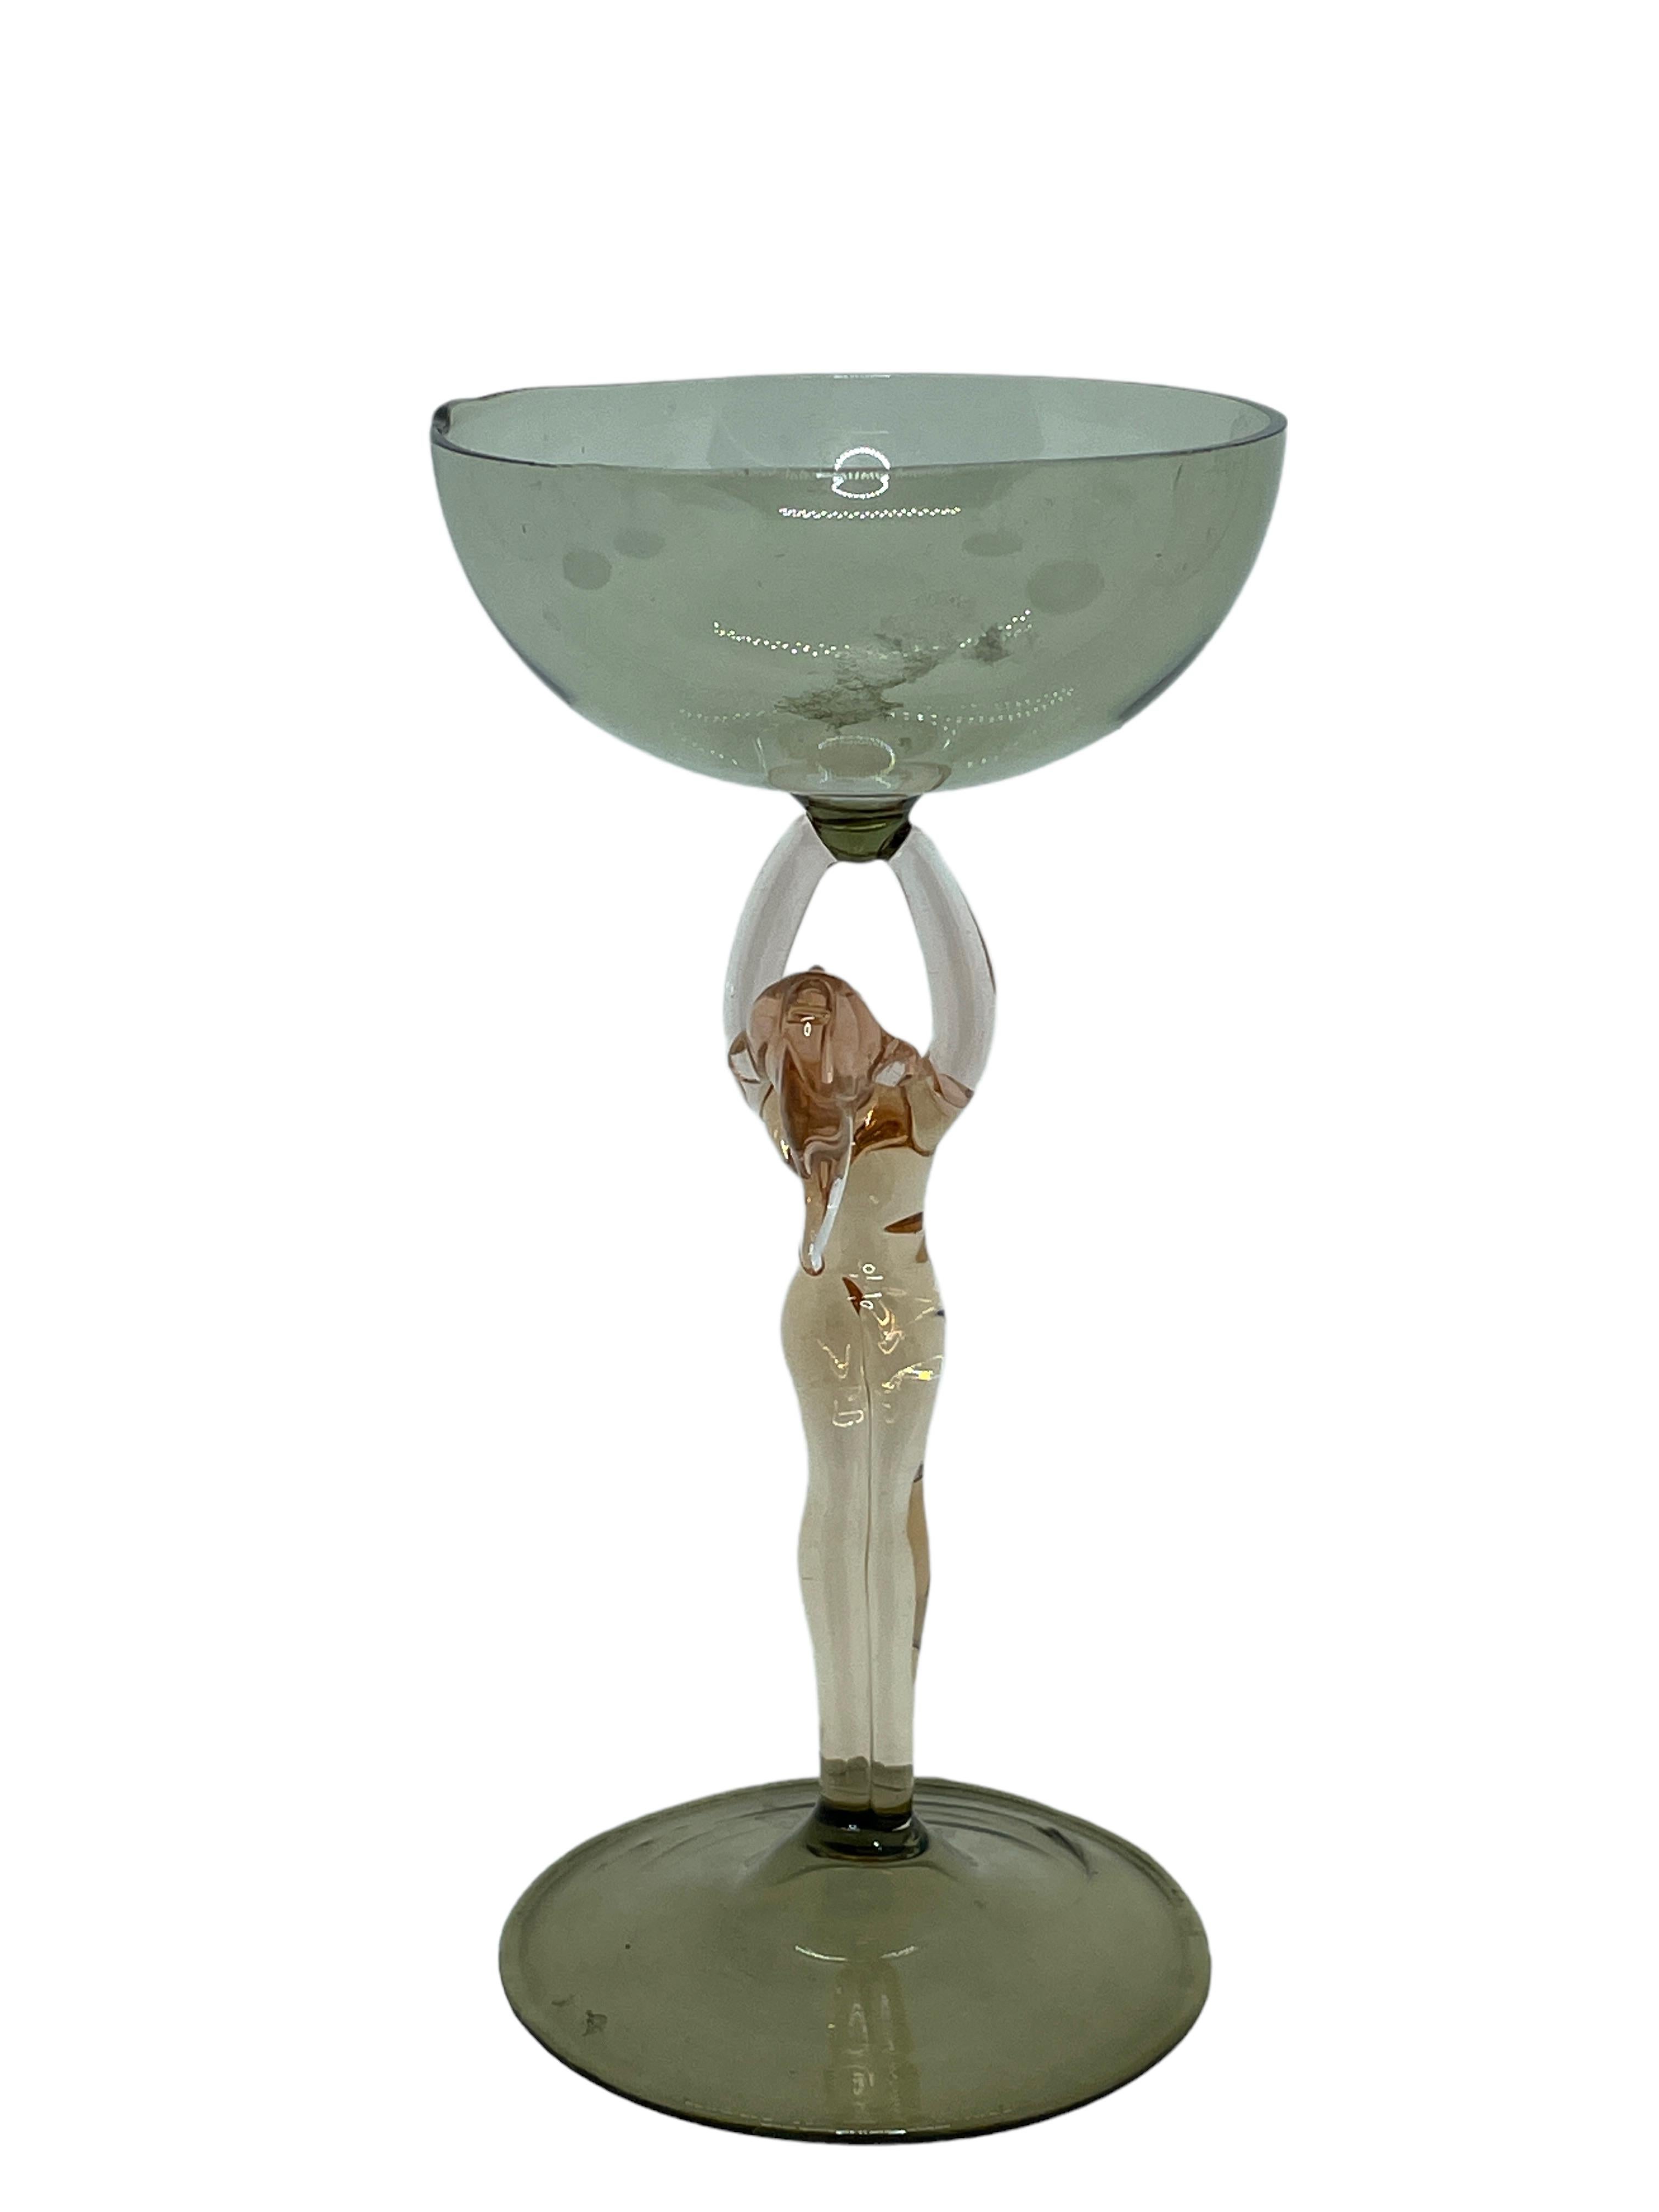 A single beautiful glass with a nude lady as stem, made in Austria. Very good vintage condition, consistent with age and use. A nice addition to any table, bar or just to display in your collection.